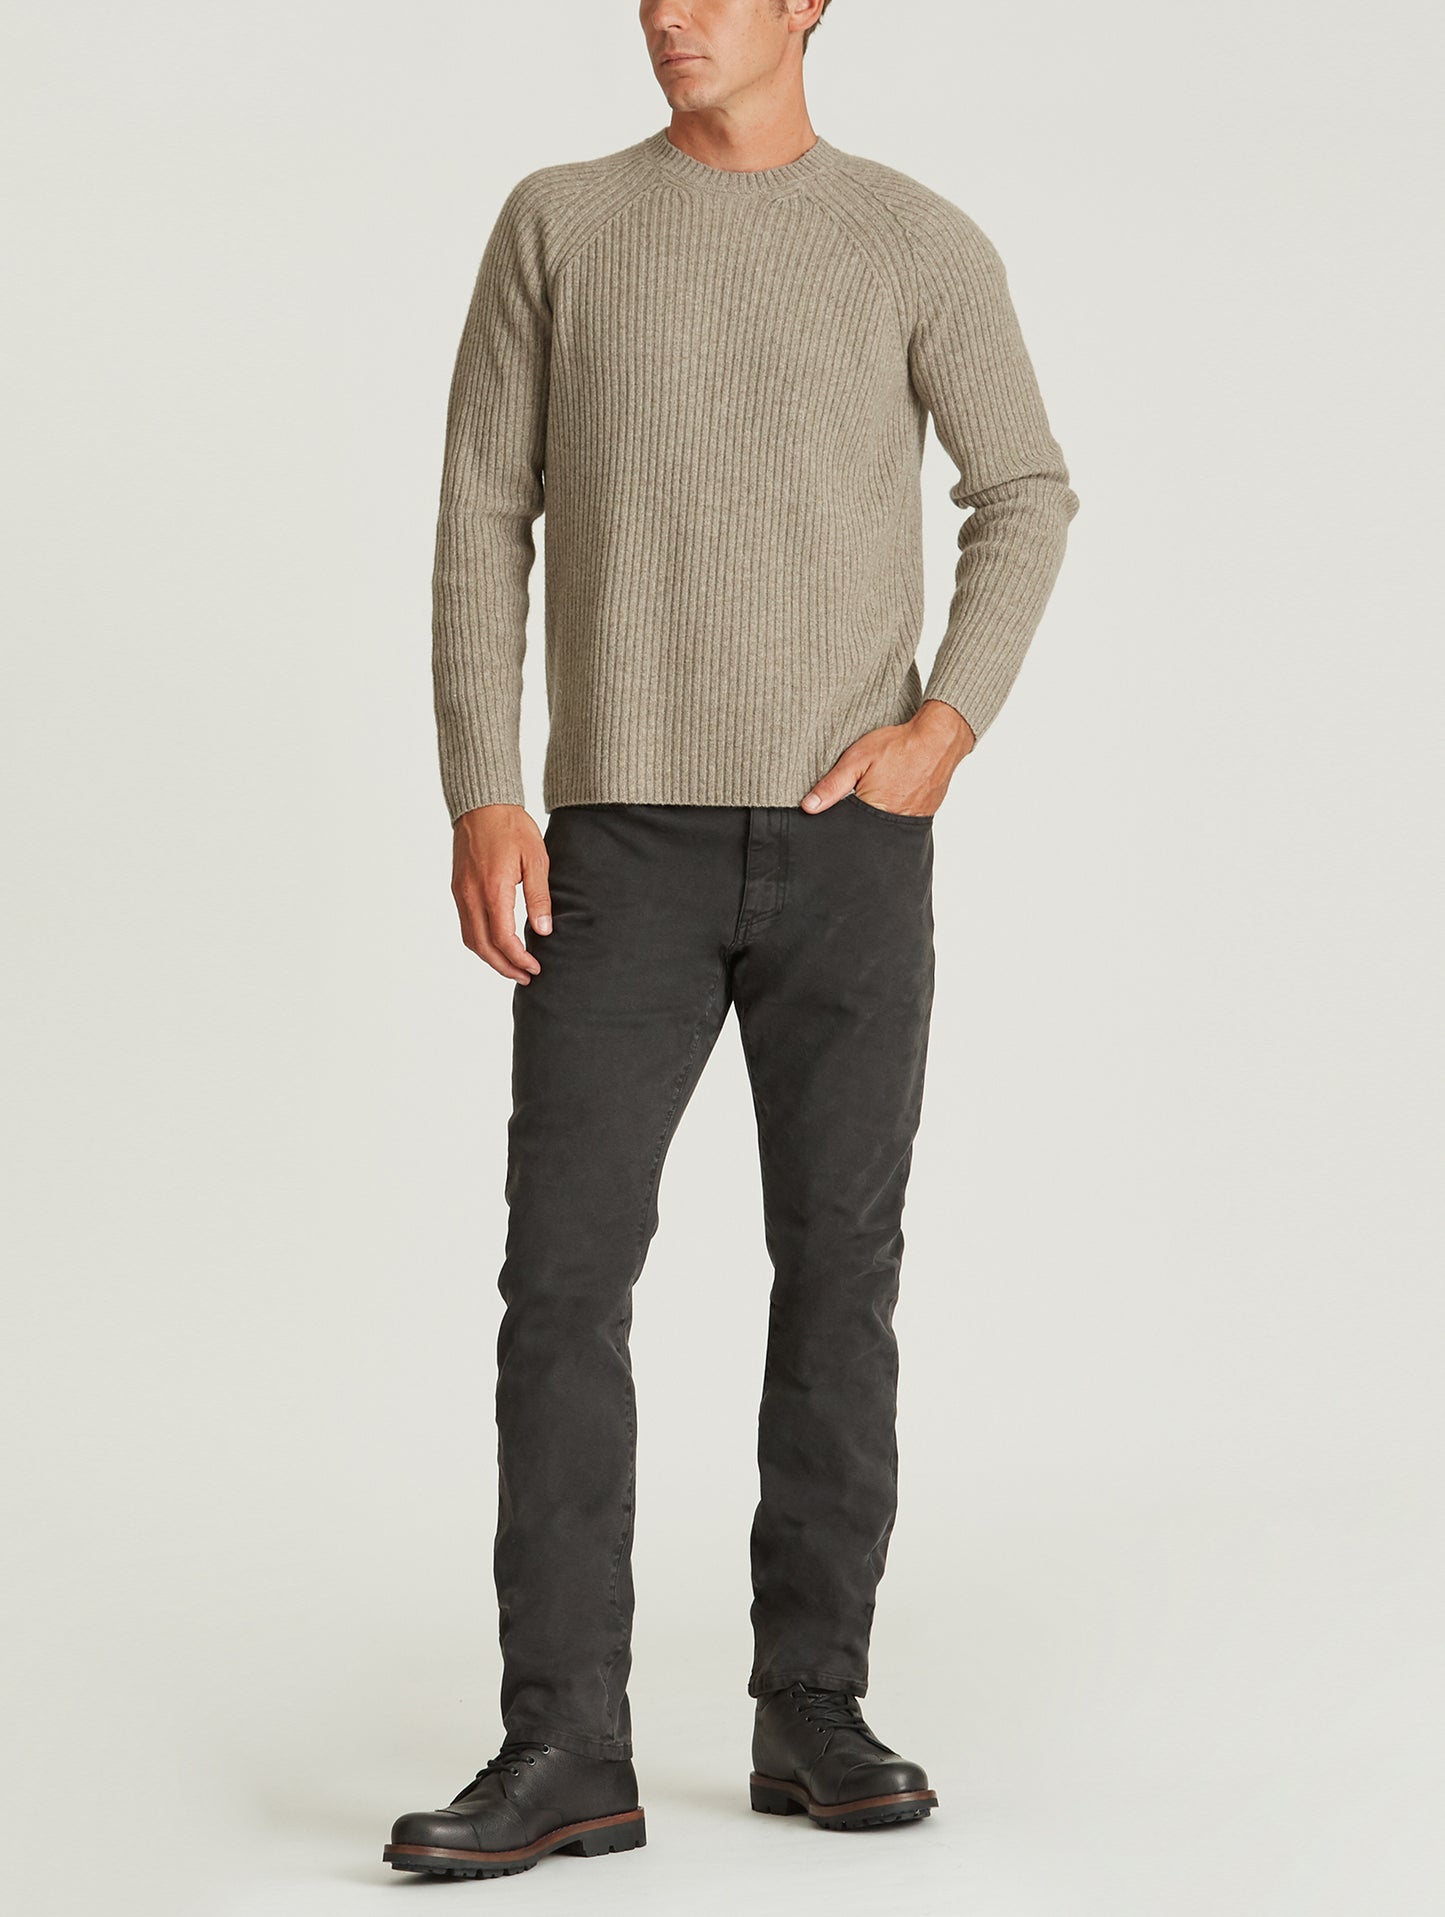 sweater for men at Aether Apparel